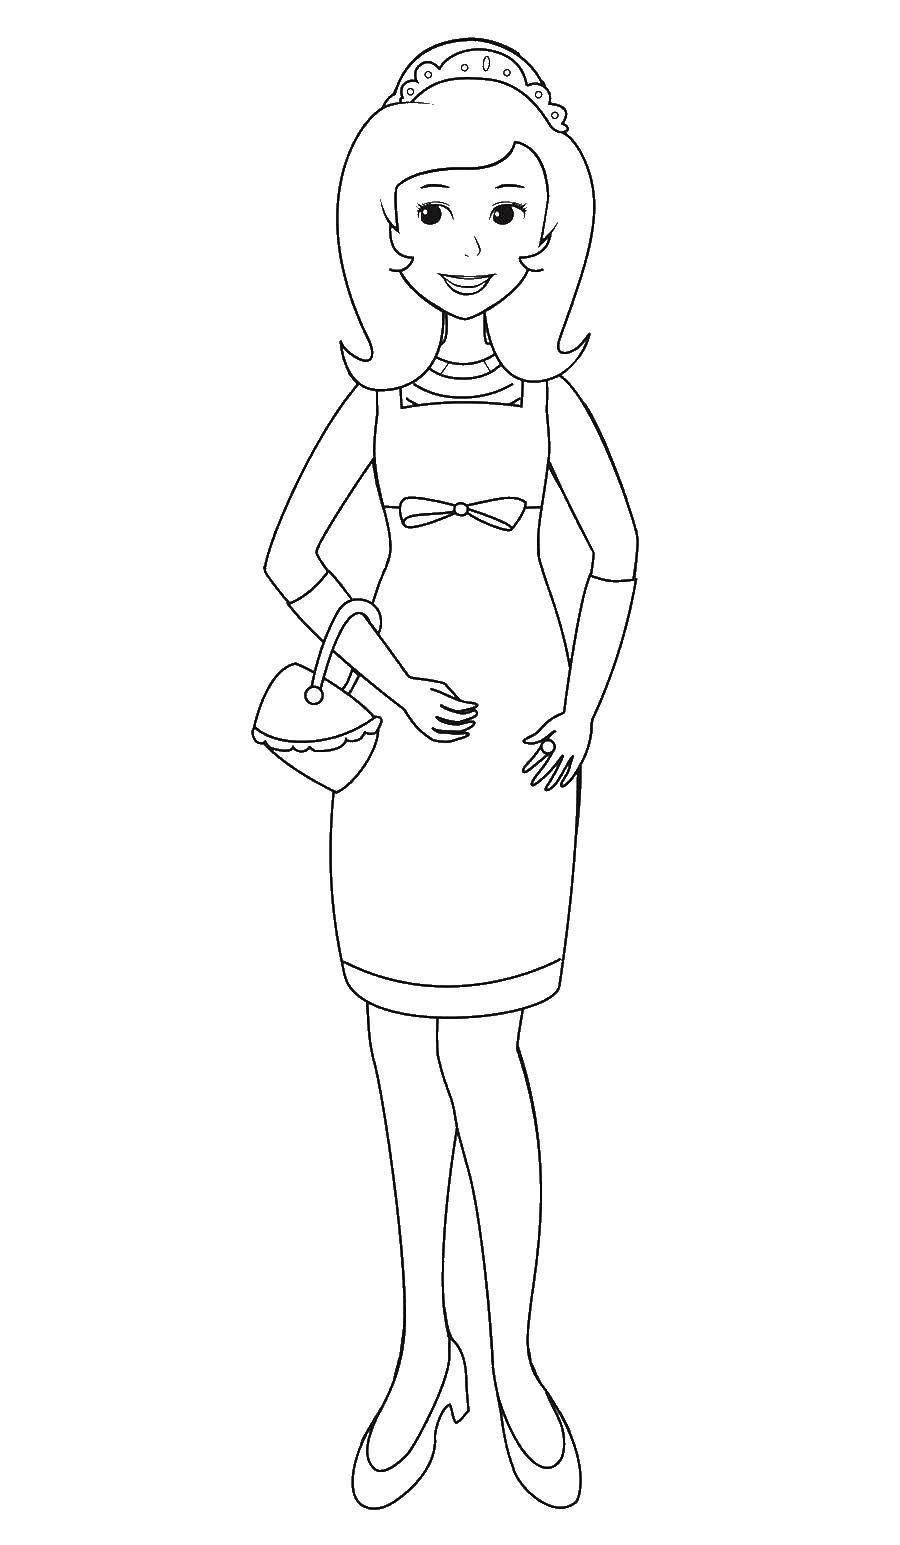 Coloring Fashionista. Category coloring pages for girls. Tags:  Girl, beauty, fashionista, fashion.